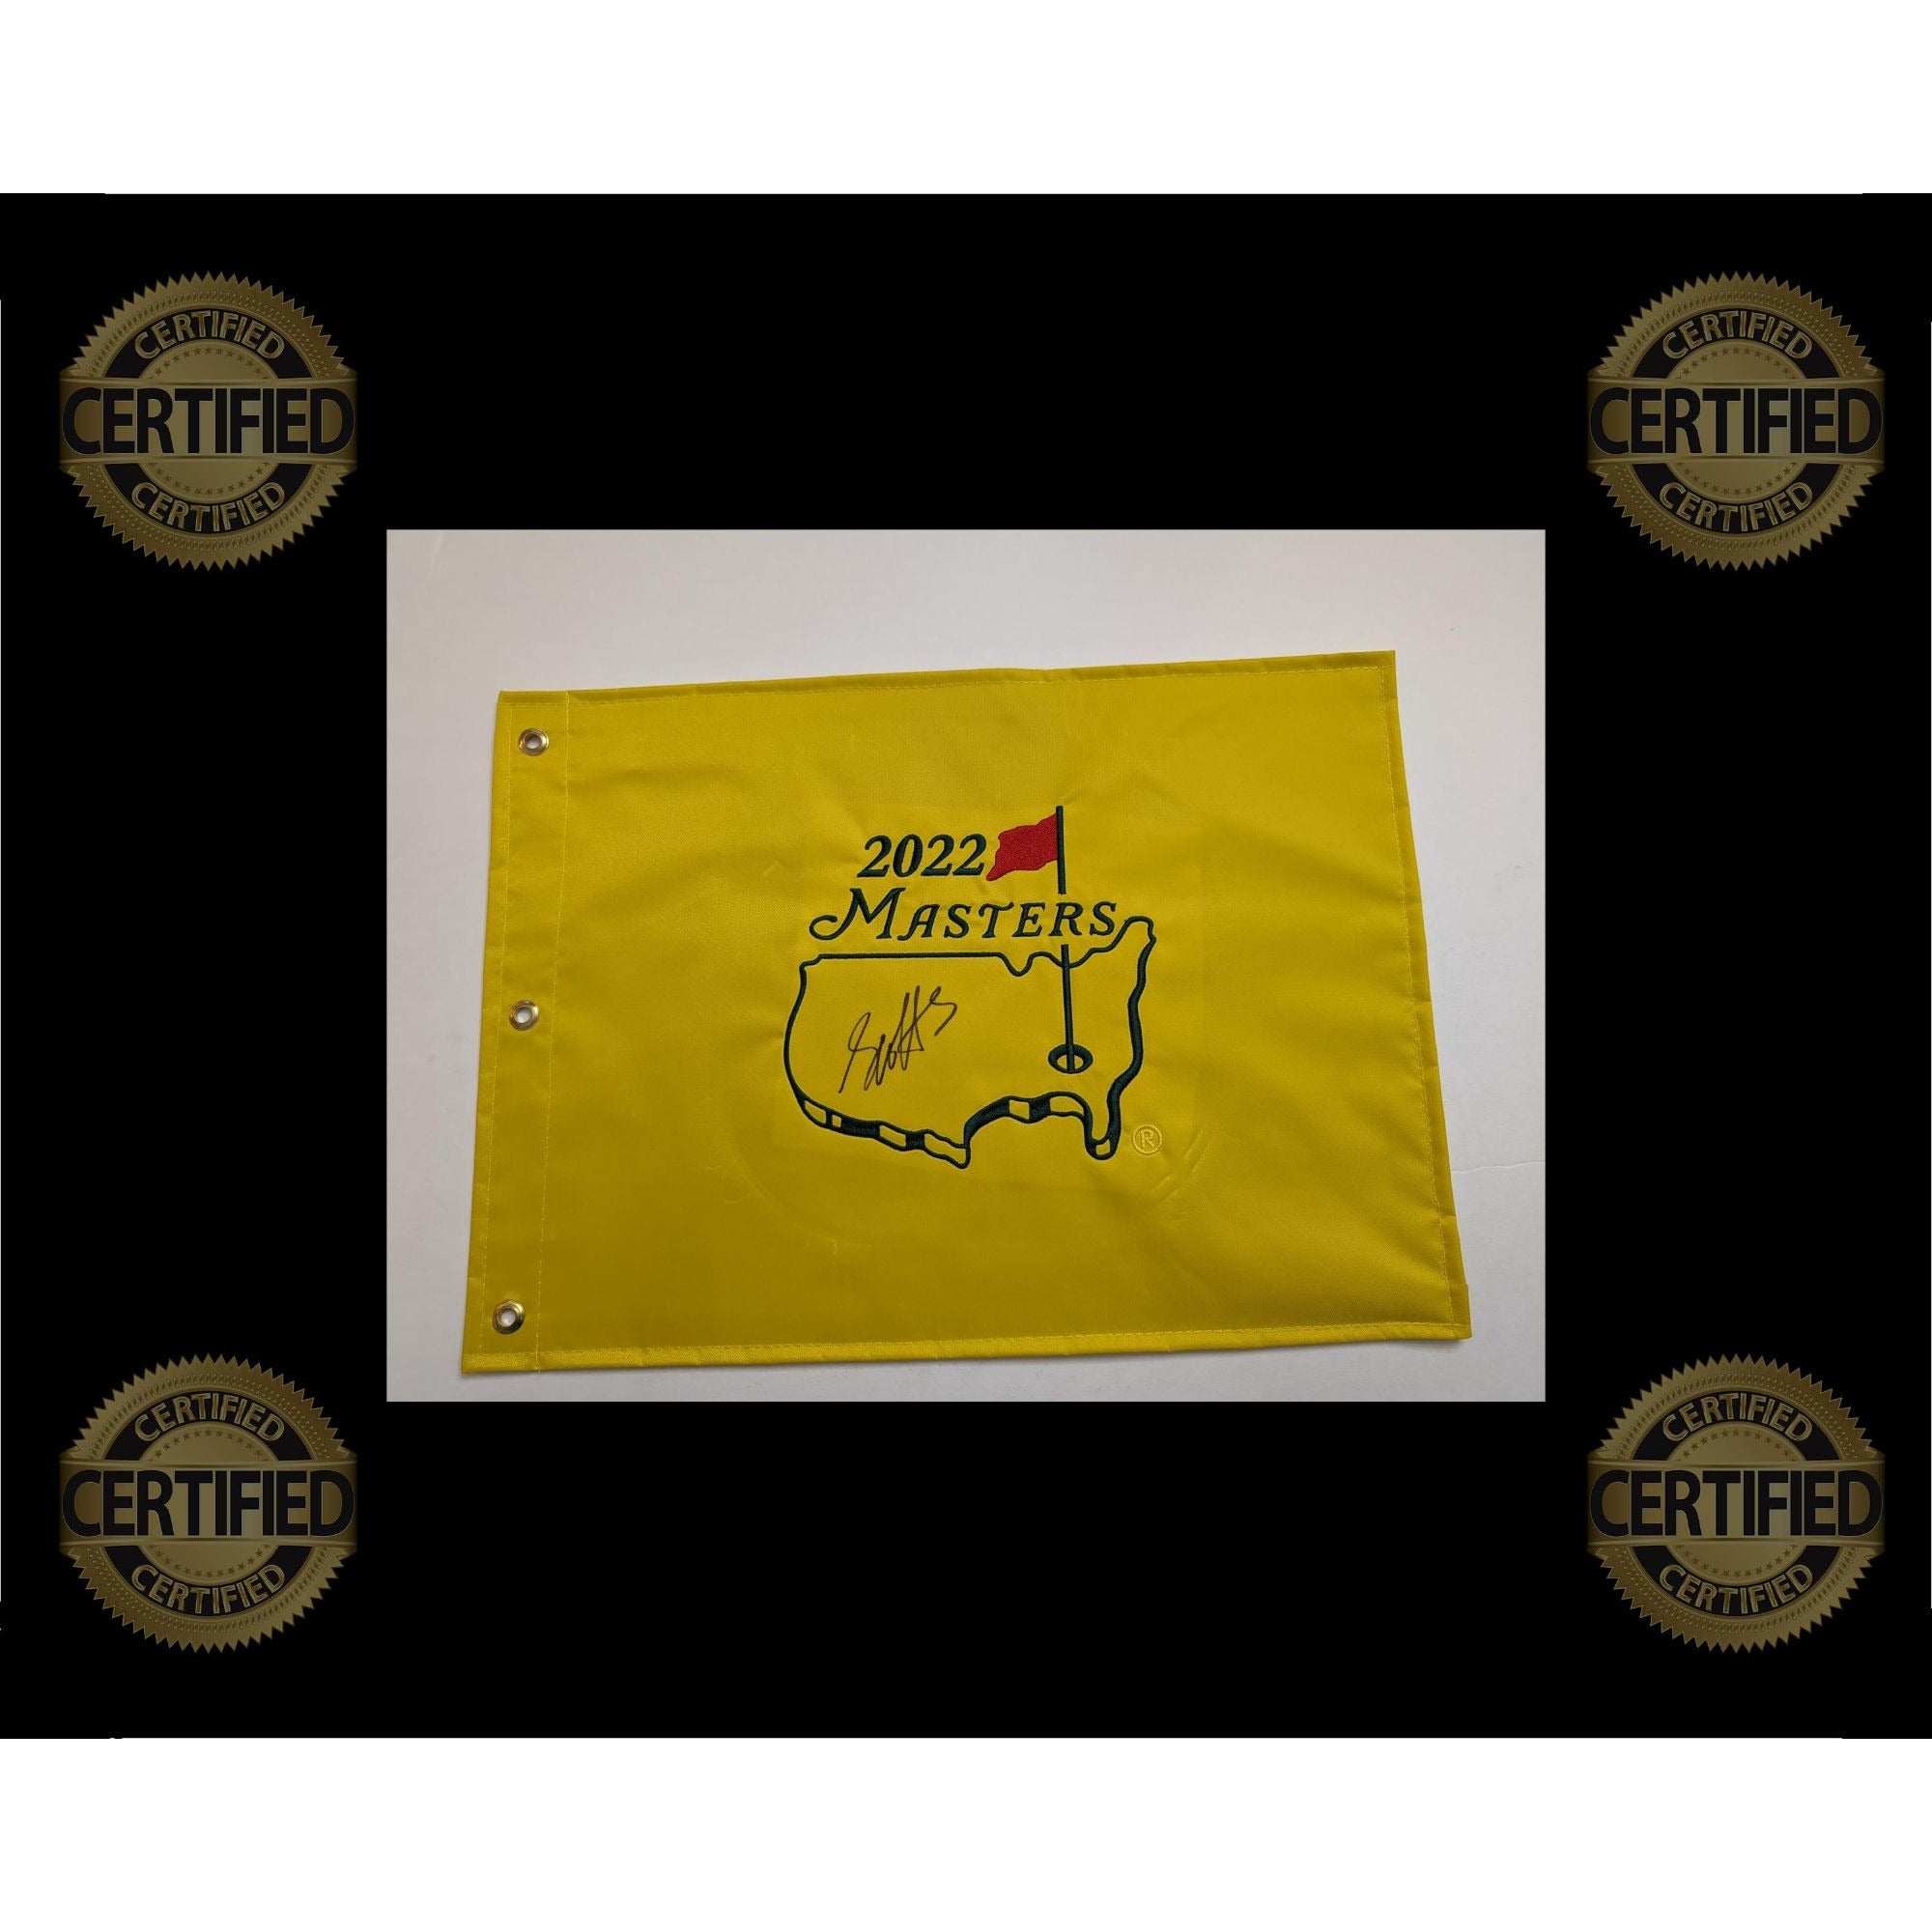 Scotty Sheffler 2022 embroidered Master's flag signed with proof